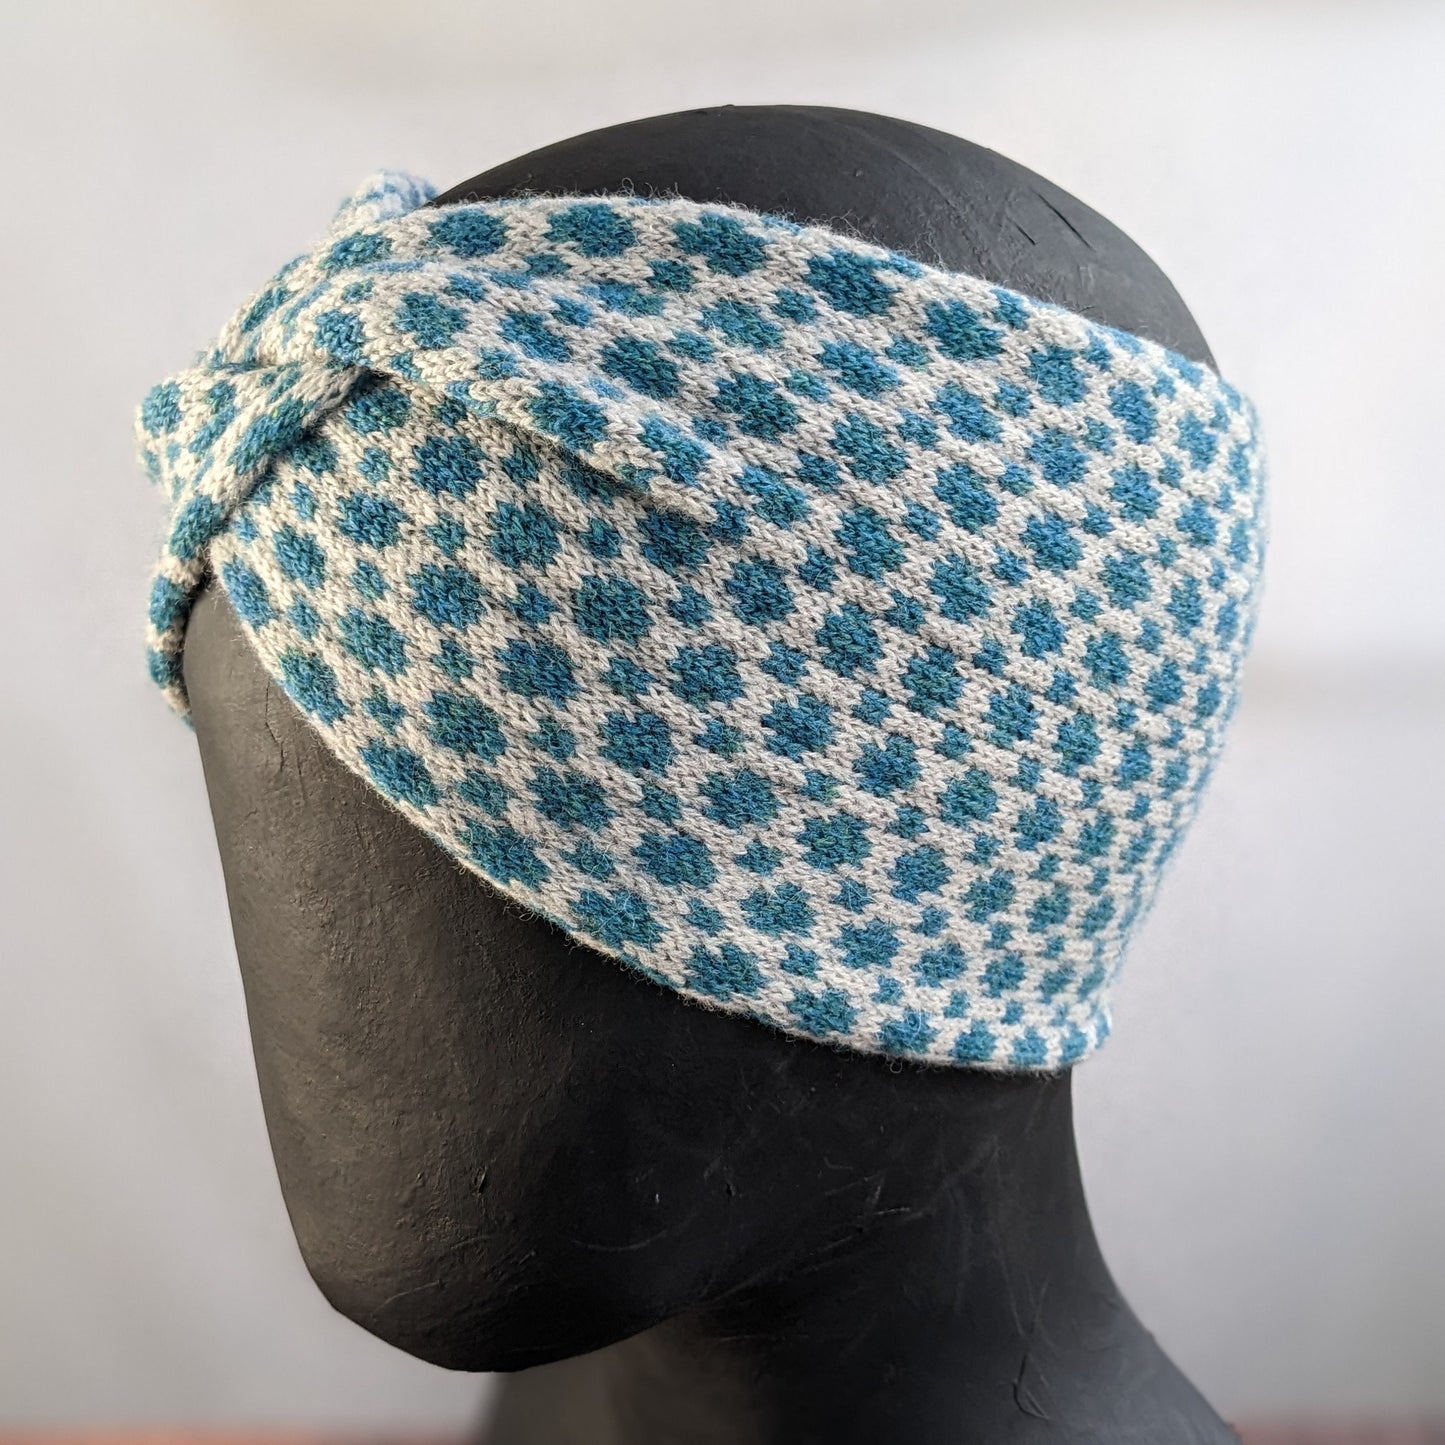 Merino wool ear warmer knitted headband dots and spots design in blue and pale grey